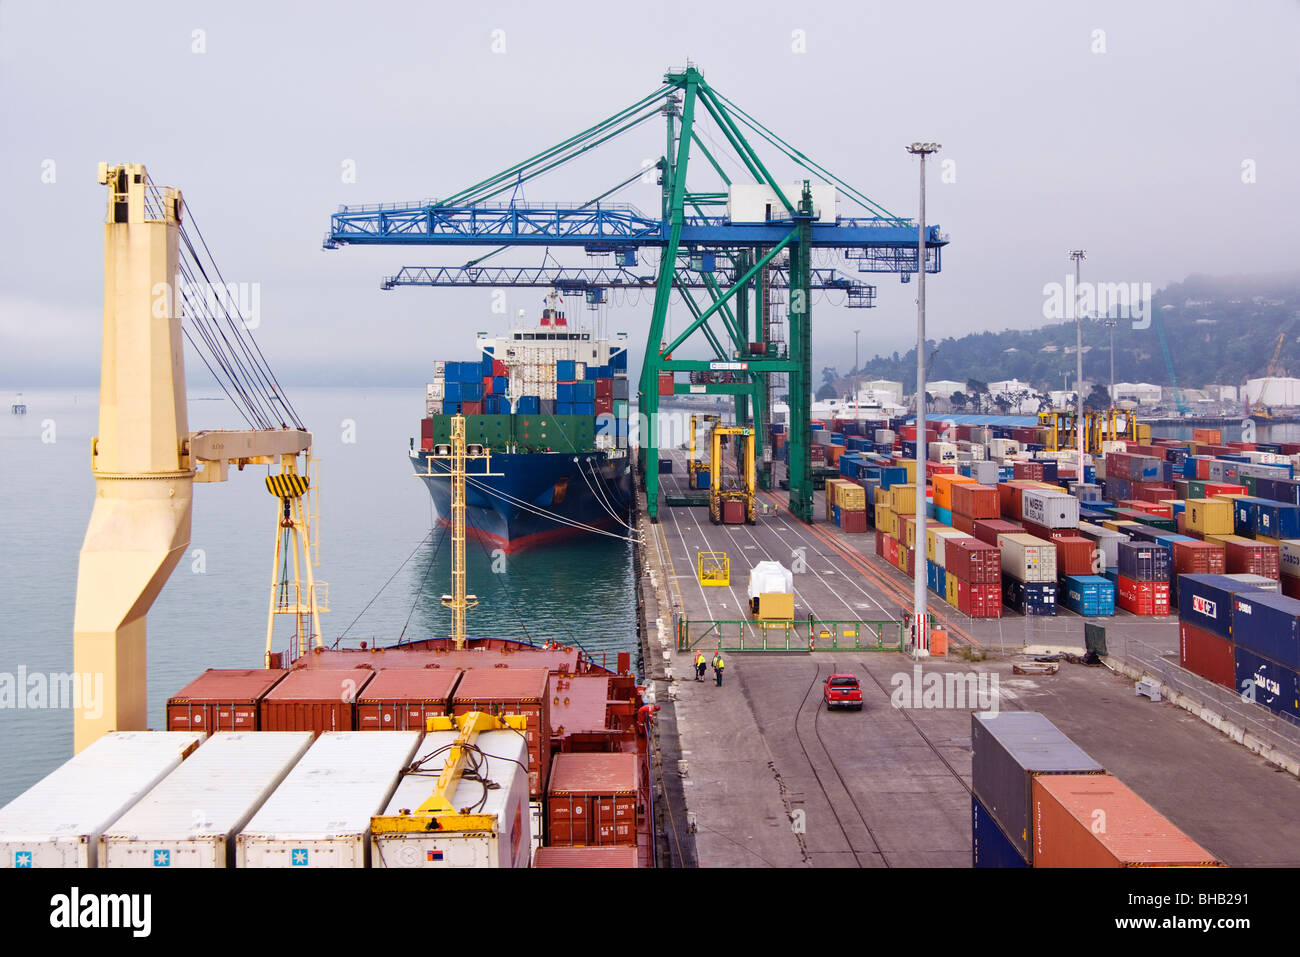 View of container terminal with ships, cranes and container yard at Lyttelton, New Zealand. Stock Photo